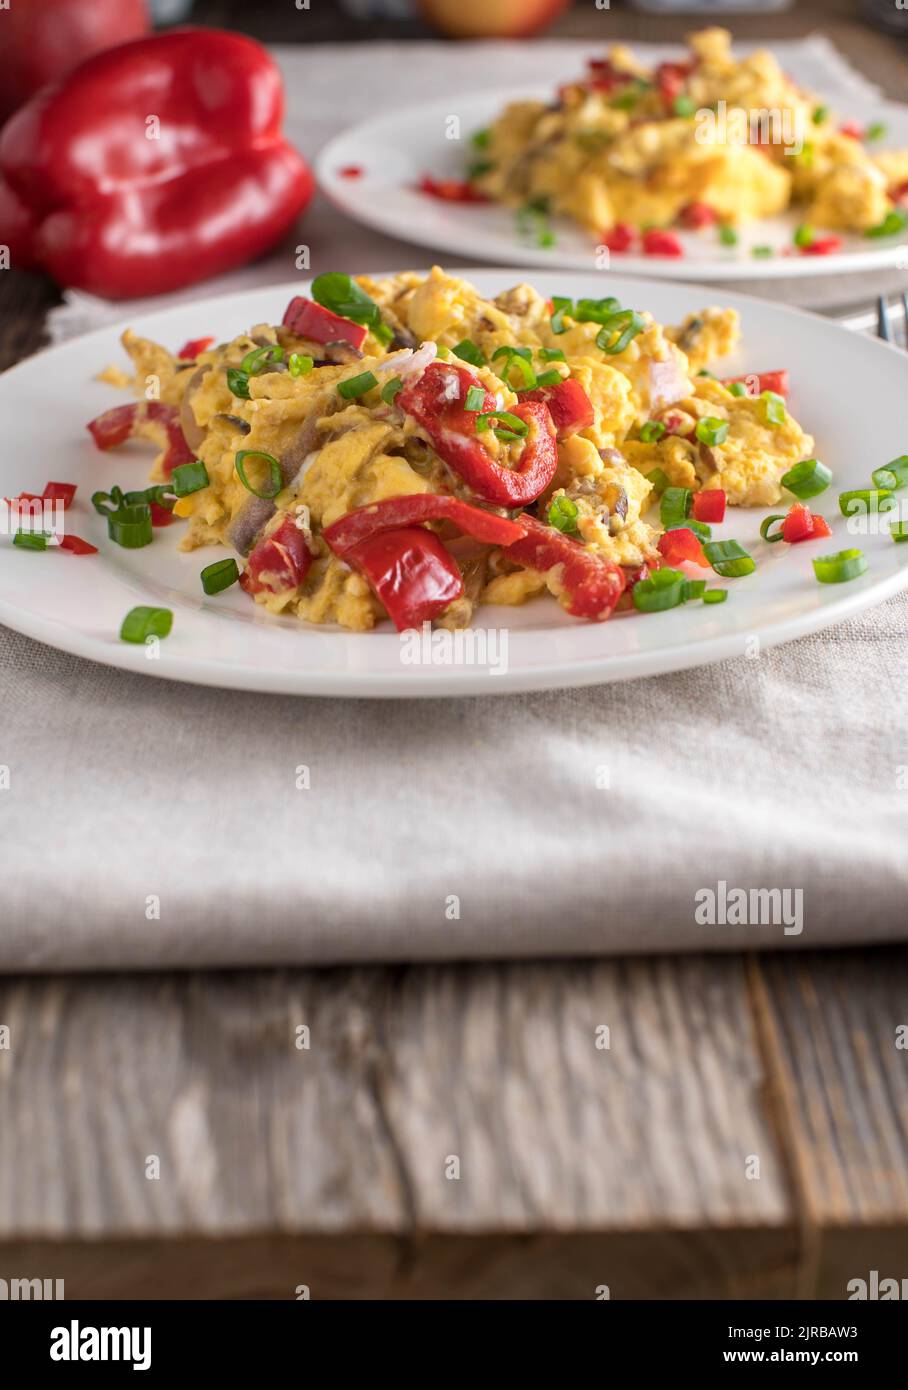 Low carb breakfast at home with scrambled eggs and vegetables. Two plates on wooden table with copy space Stock Photo